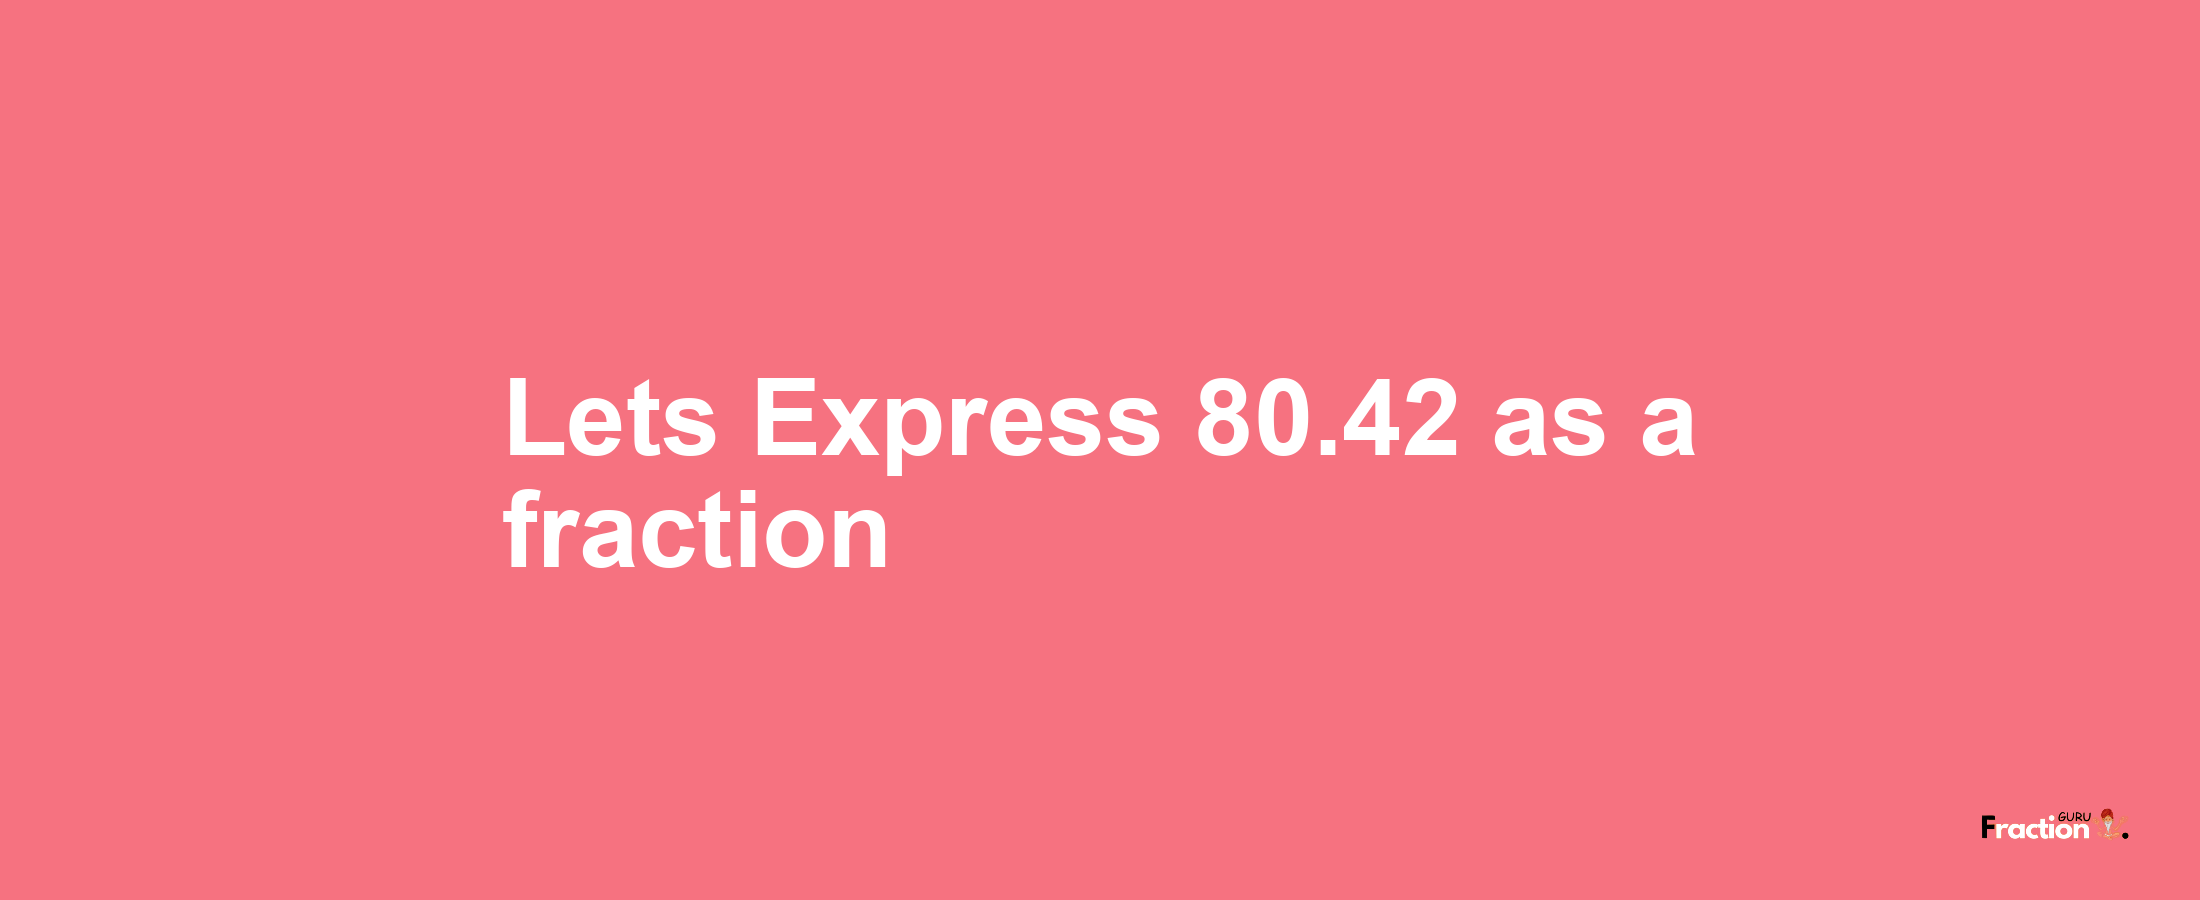 Lets Express 80.42 as afraction